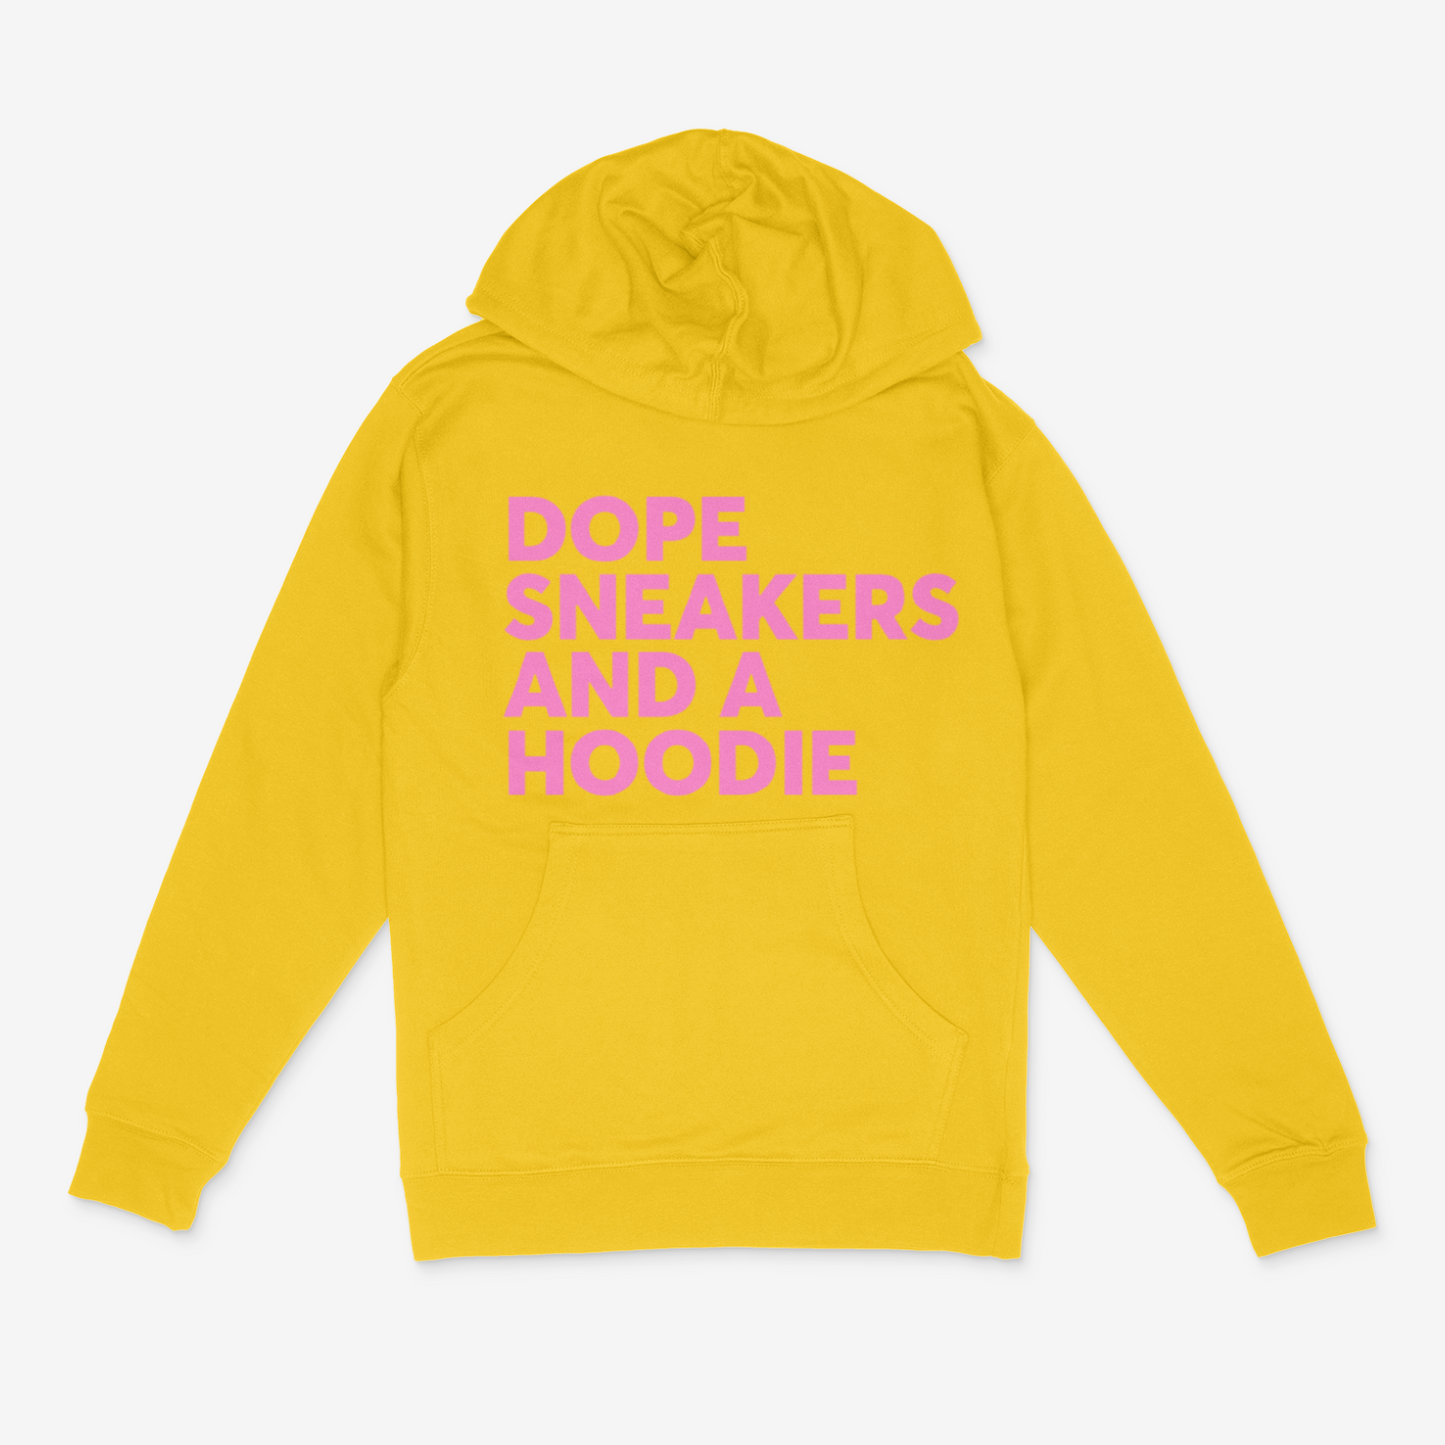 Dope Sneakers and A Hoodie (Pink)